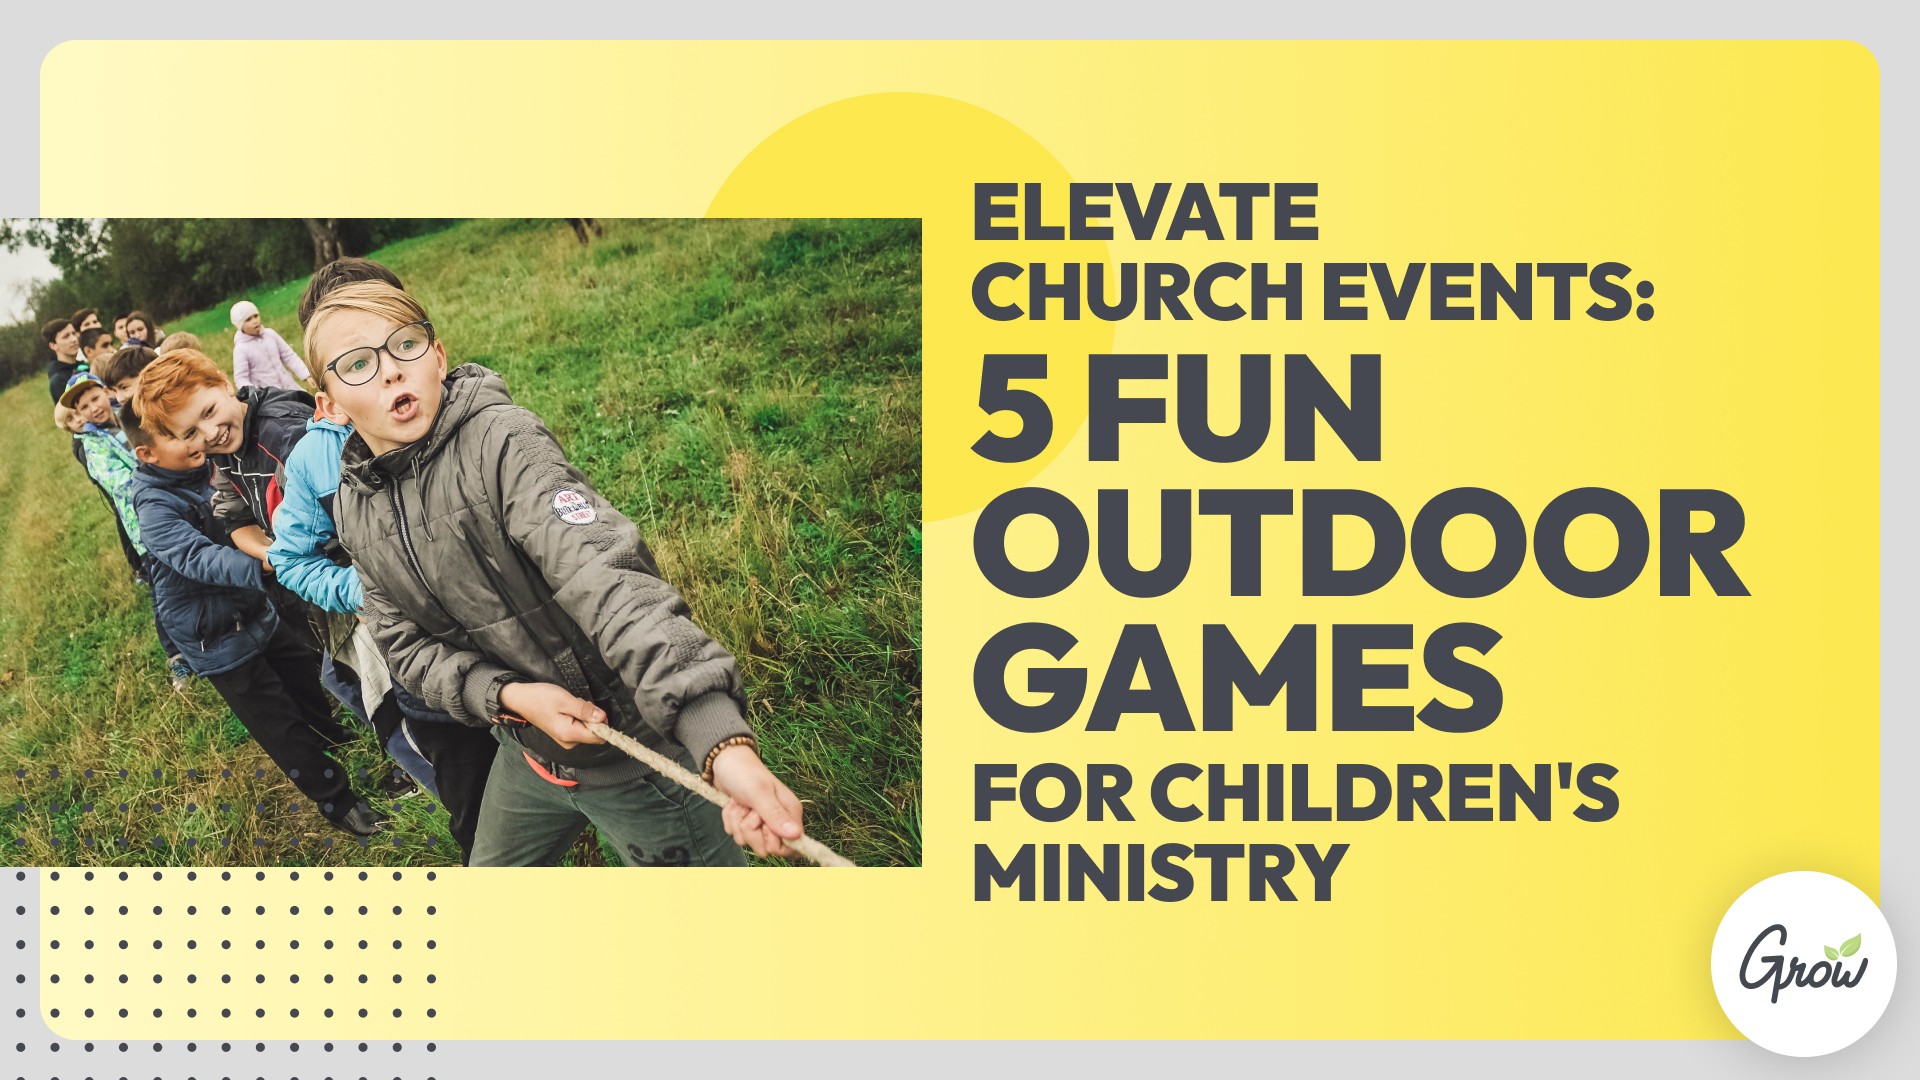 Elevate Church Events: 5 Fun Outdoor Games for Children's Ministry